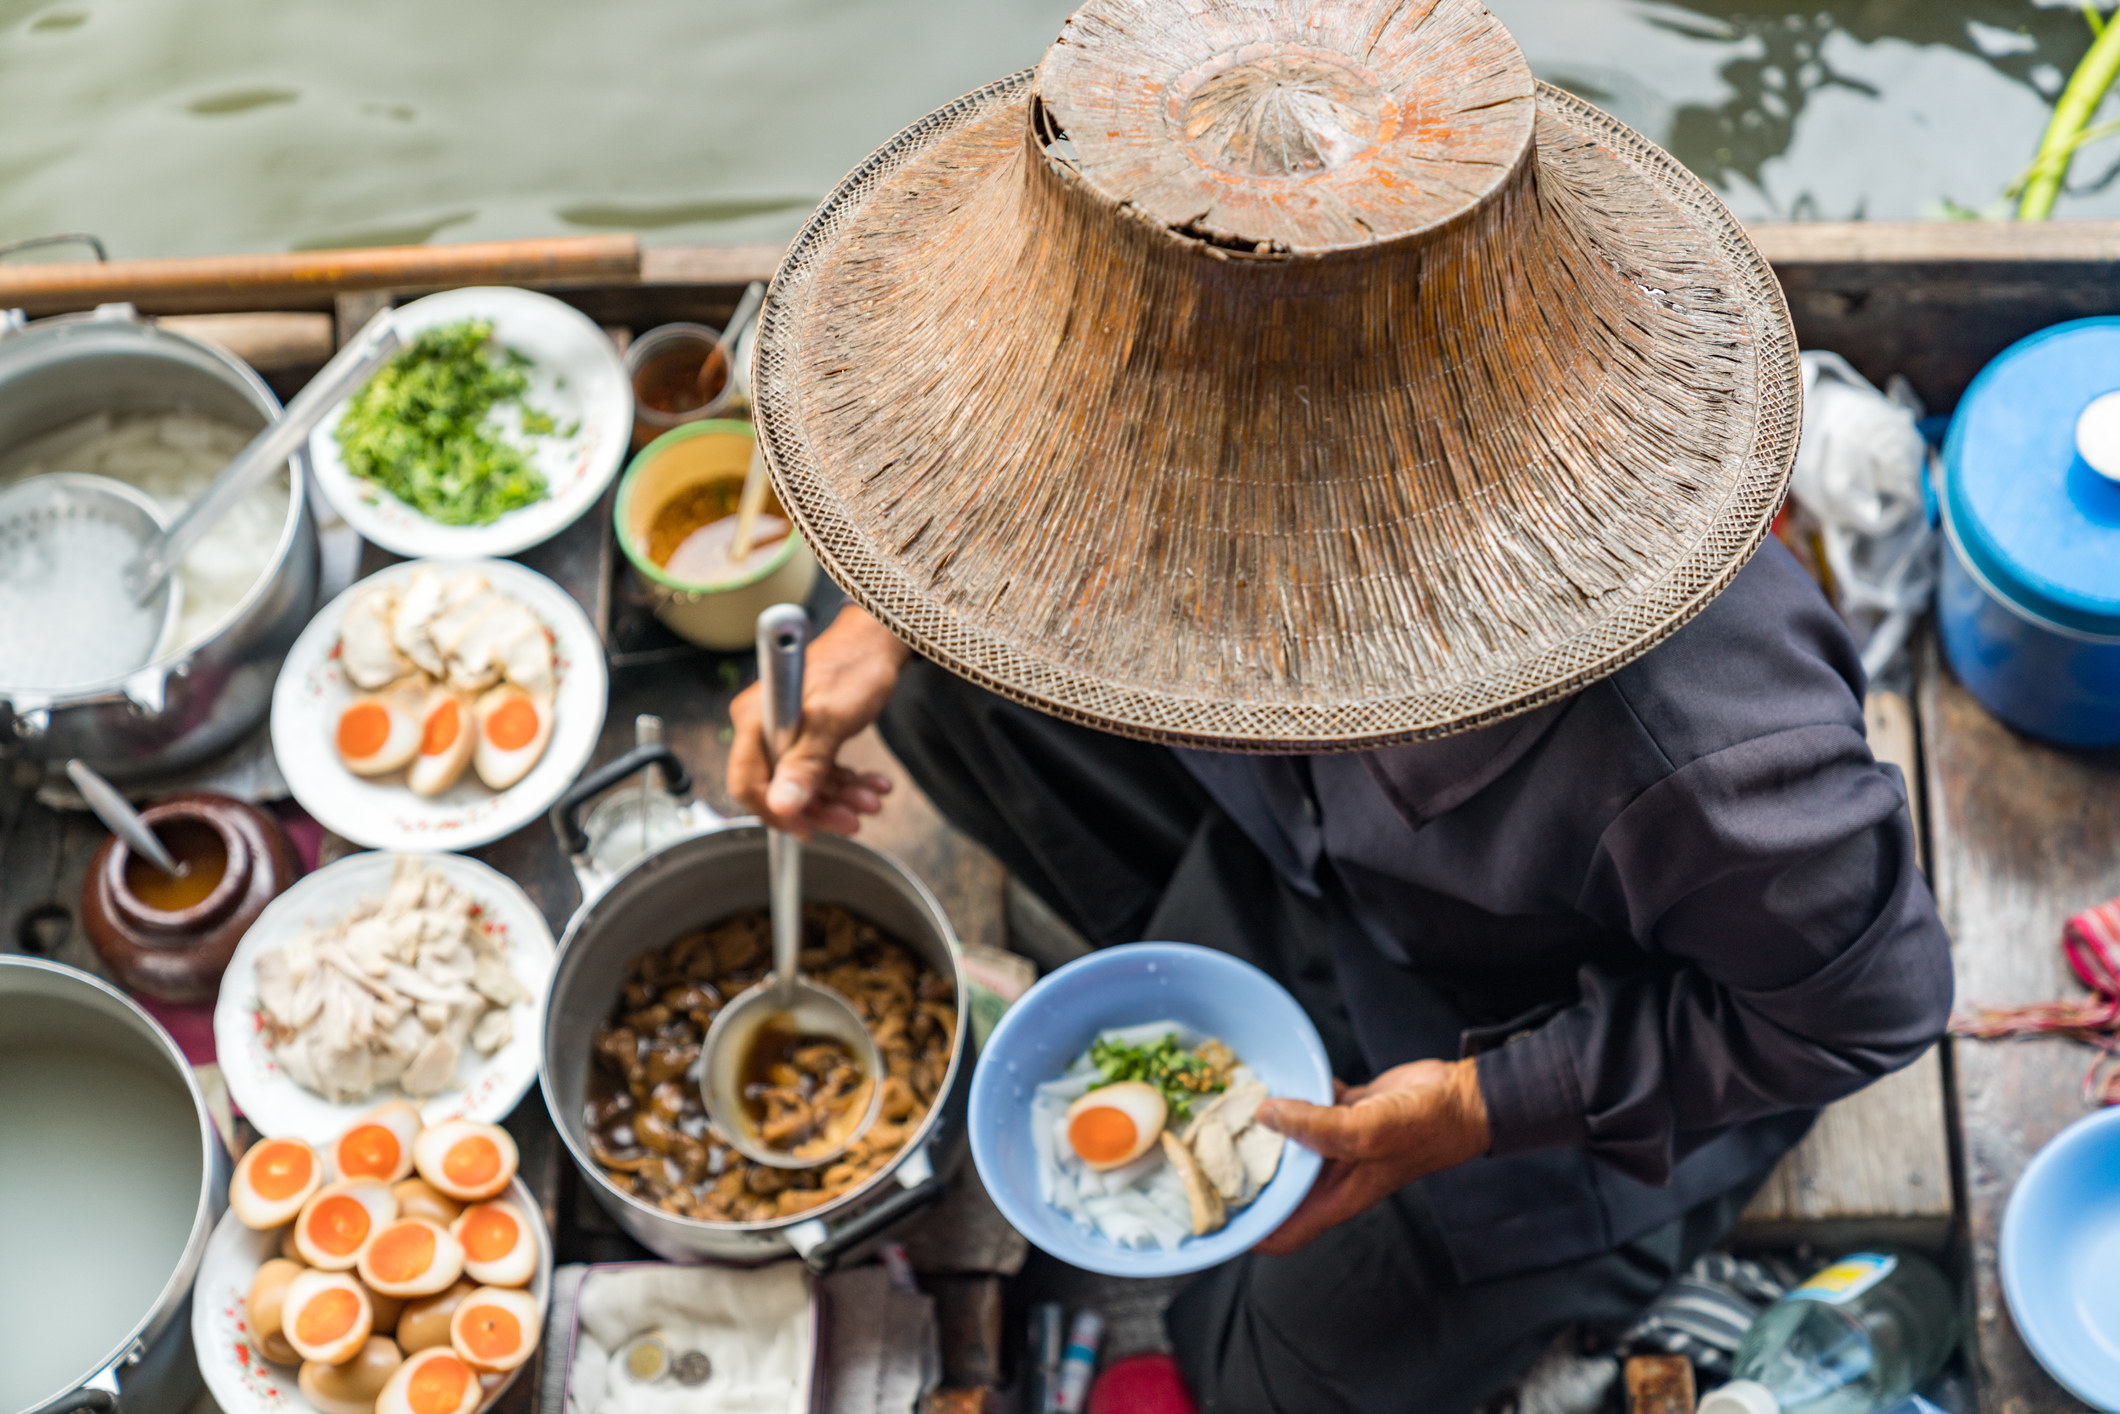 A woman serving food from a floating market.